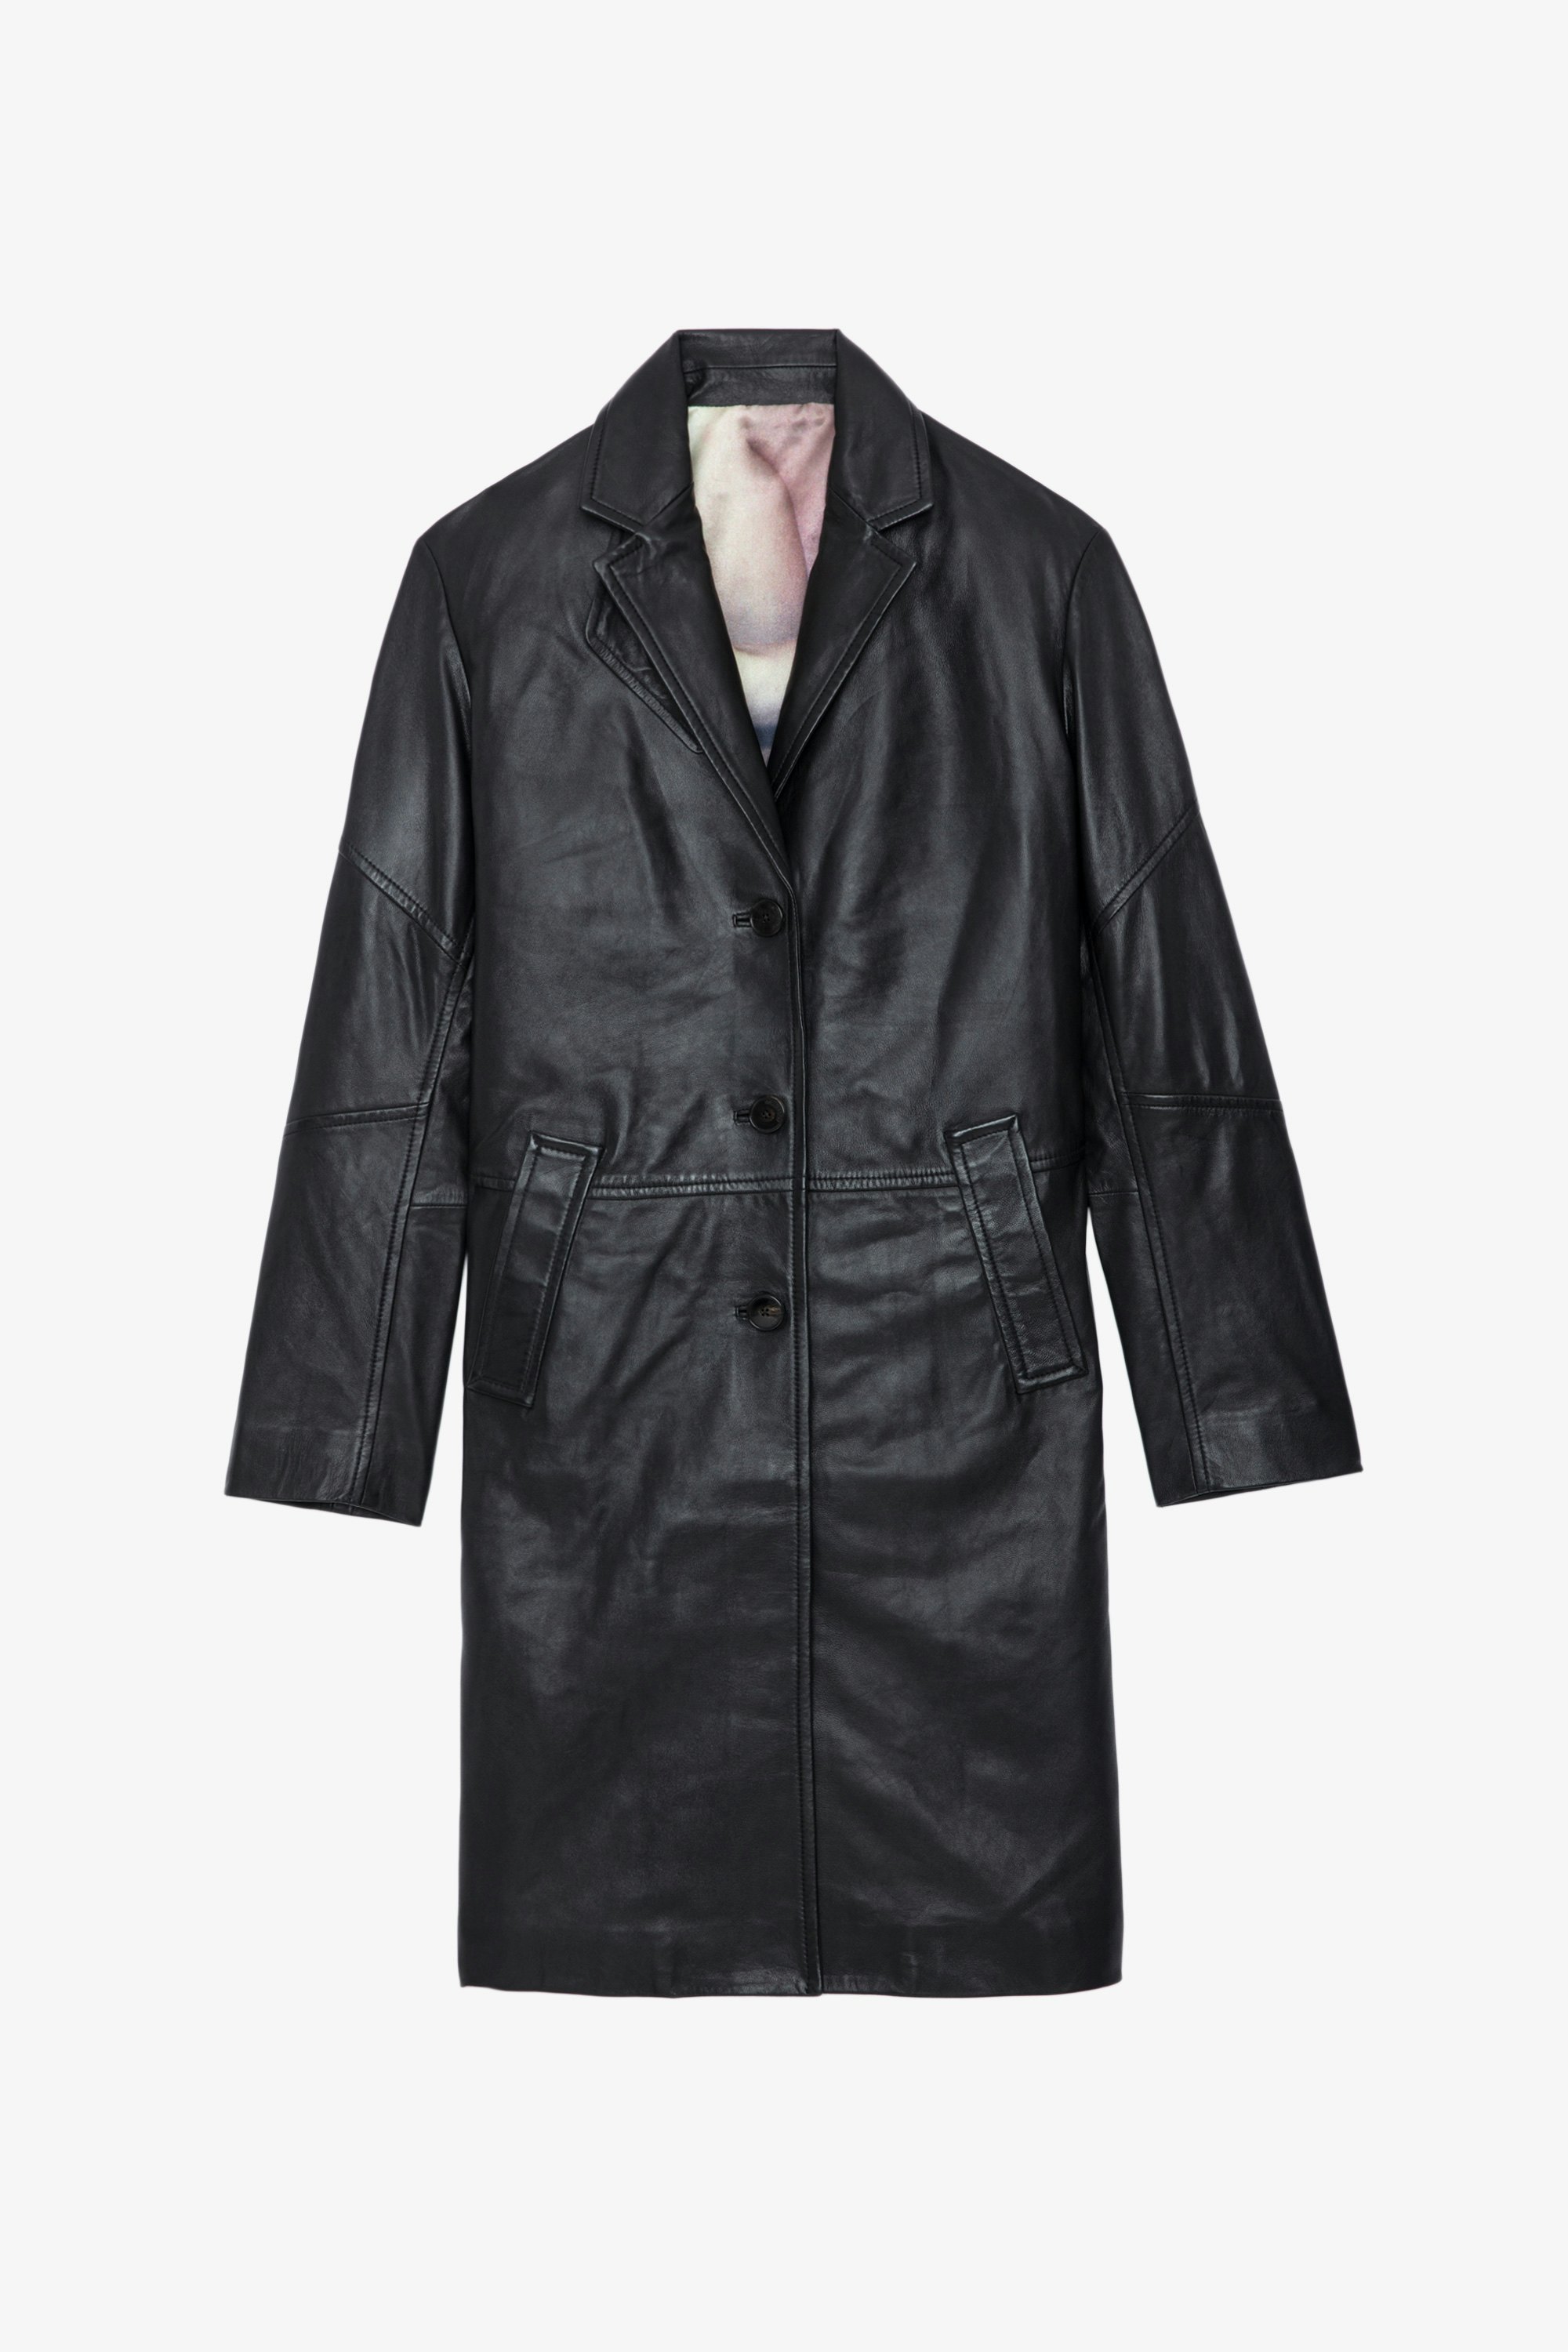 Macari Leather Coat - Long black smooth leather buttoned coat.